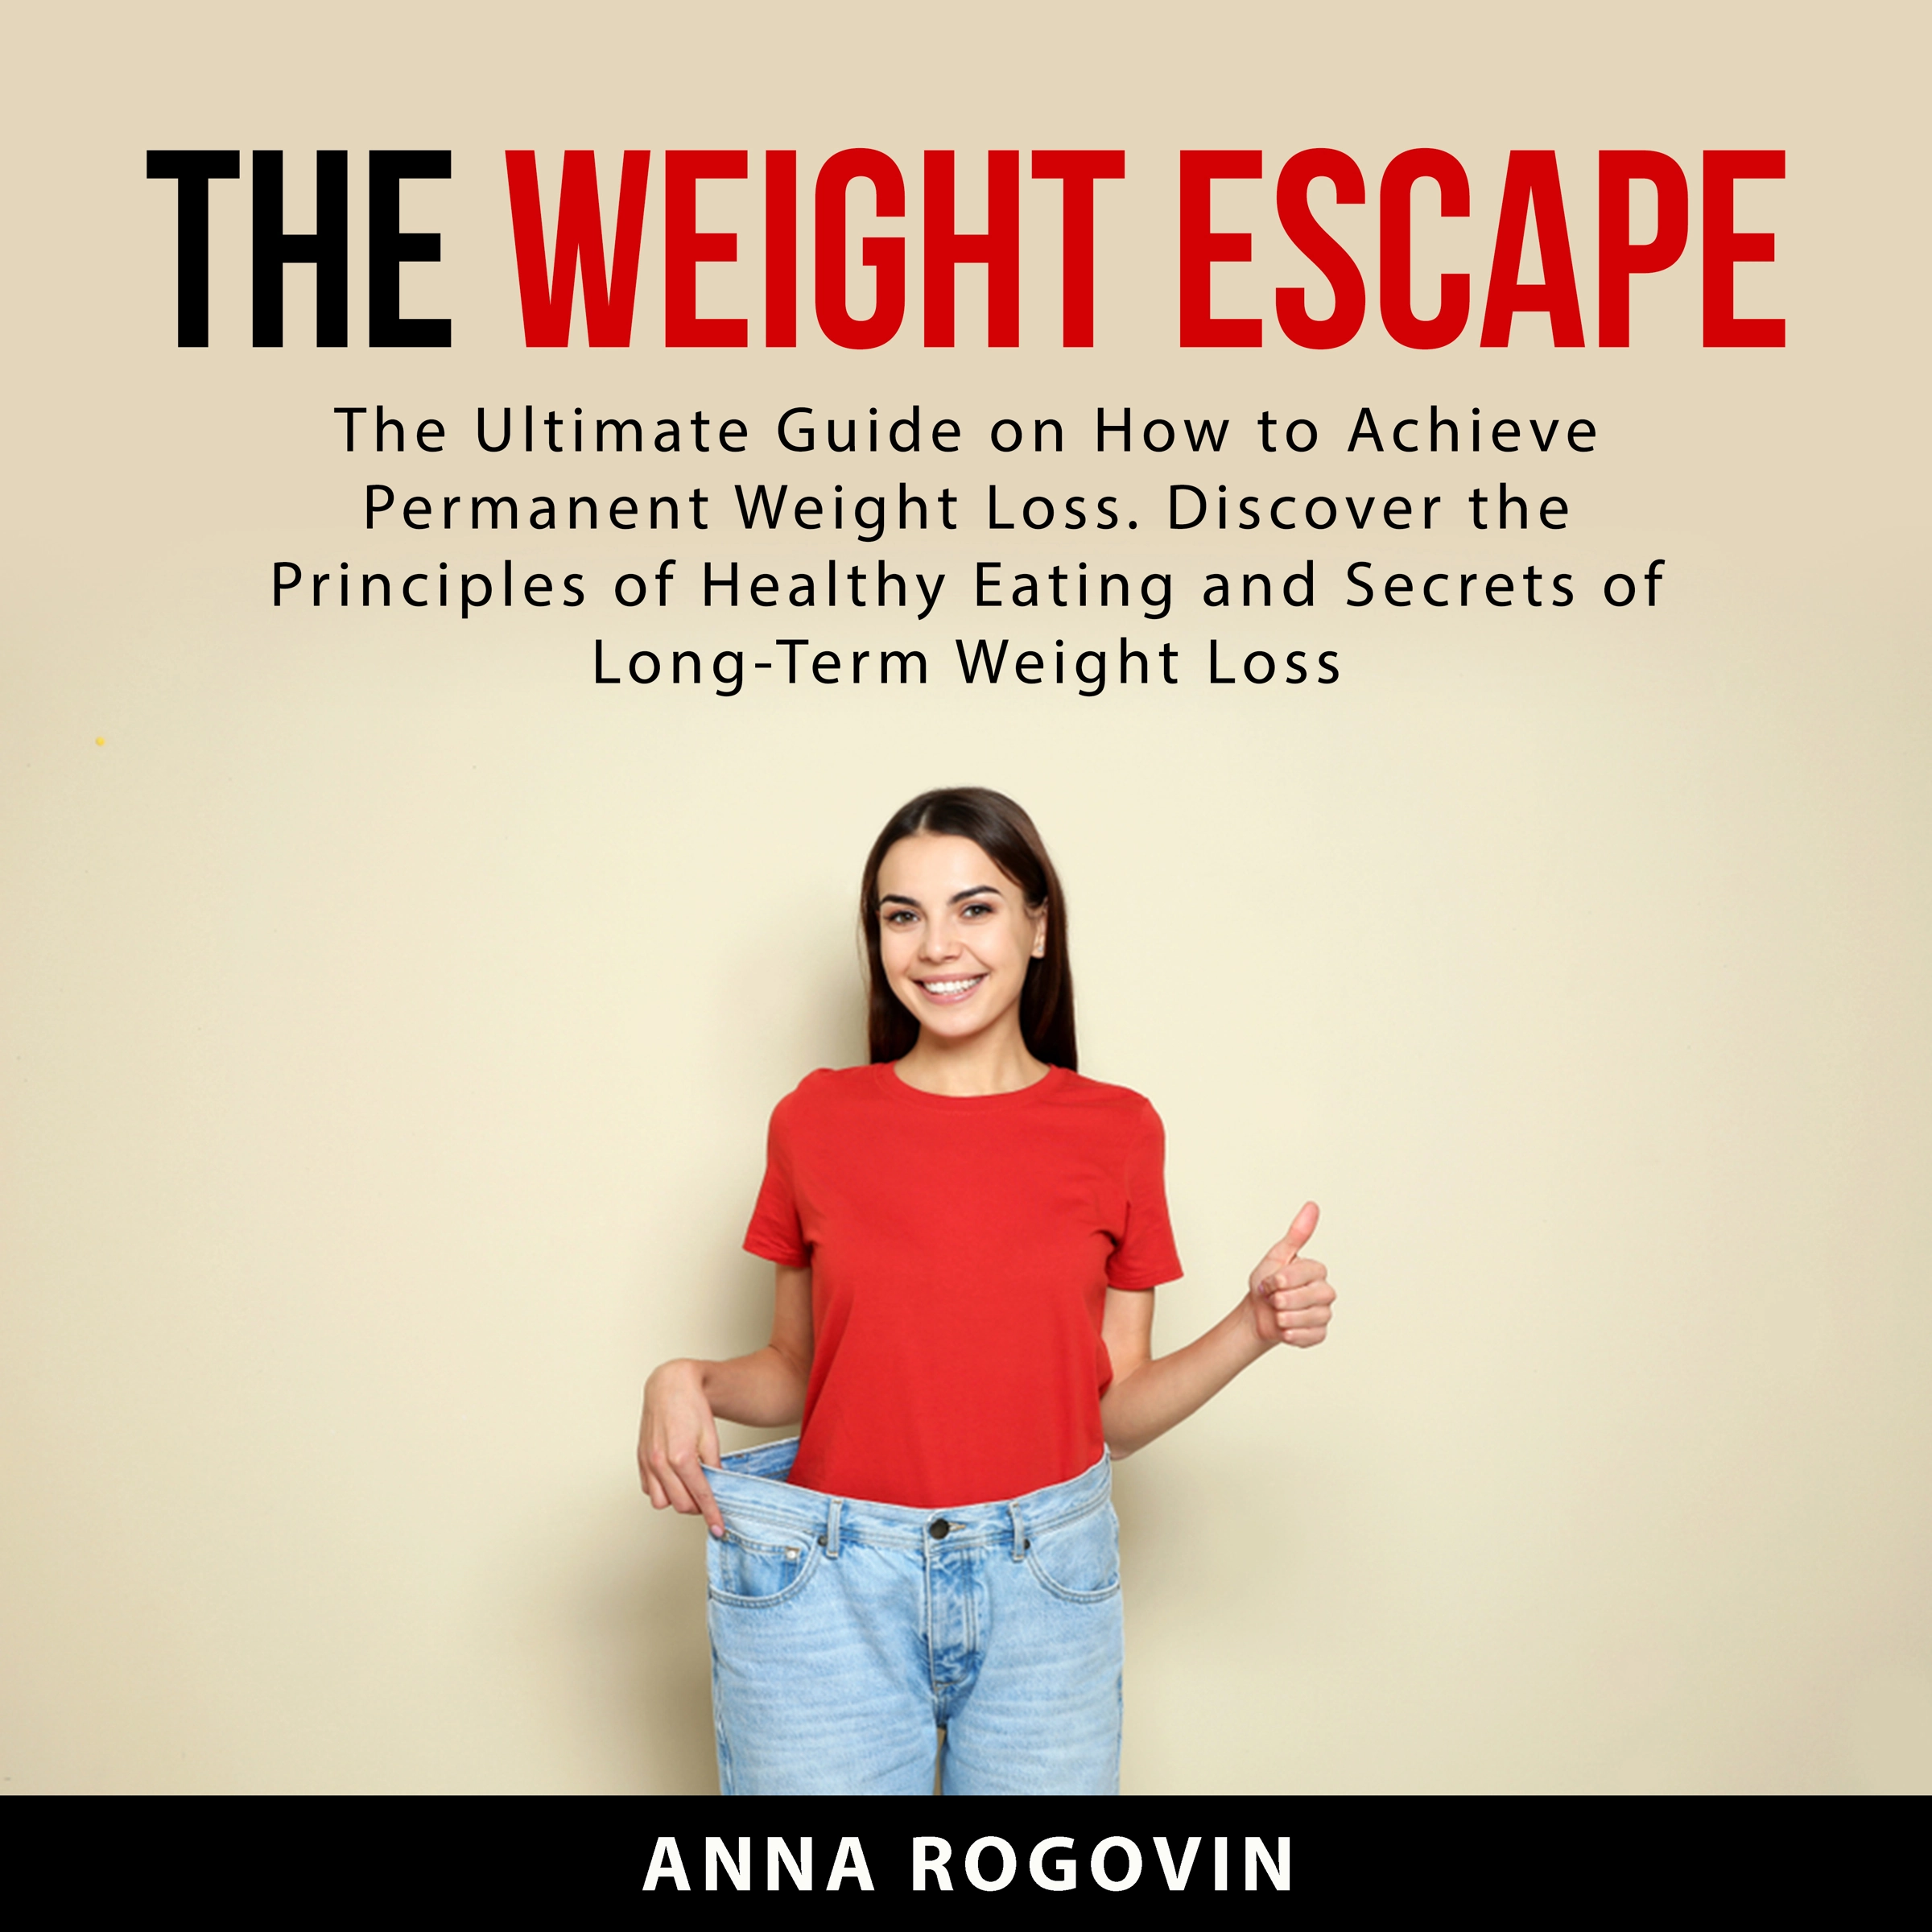 The Weight Escape Audiobook by Anna Rogovin